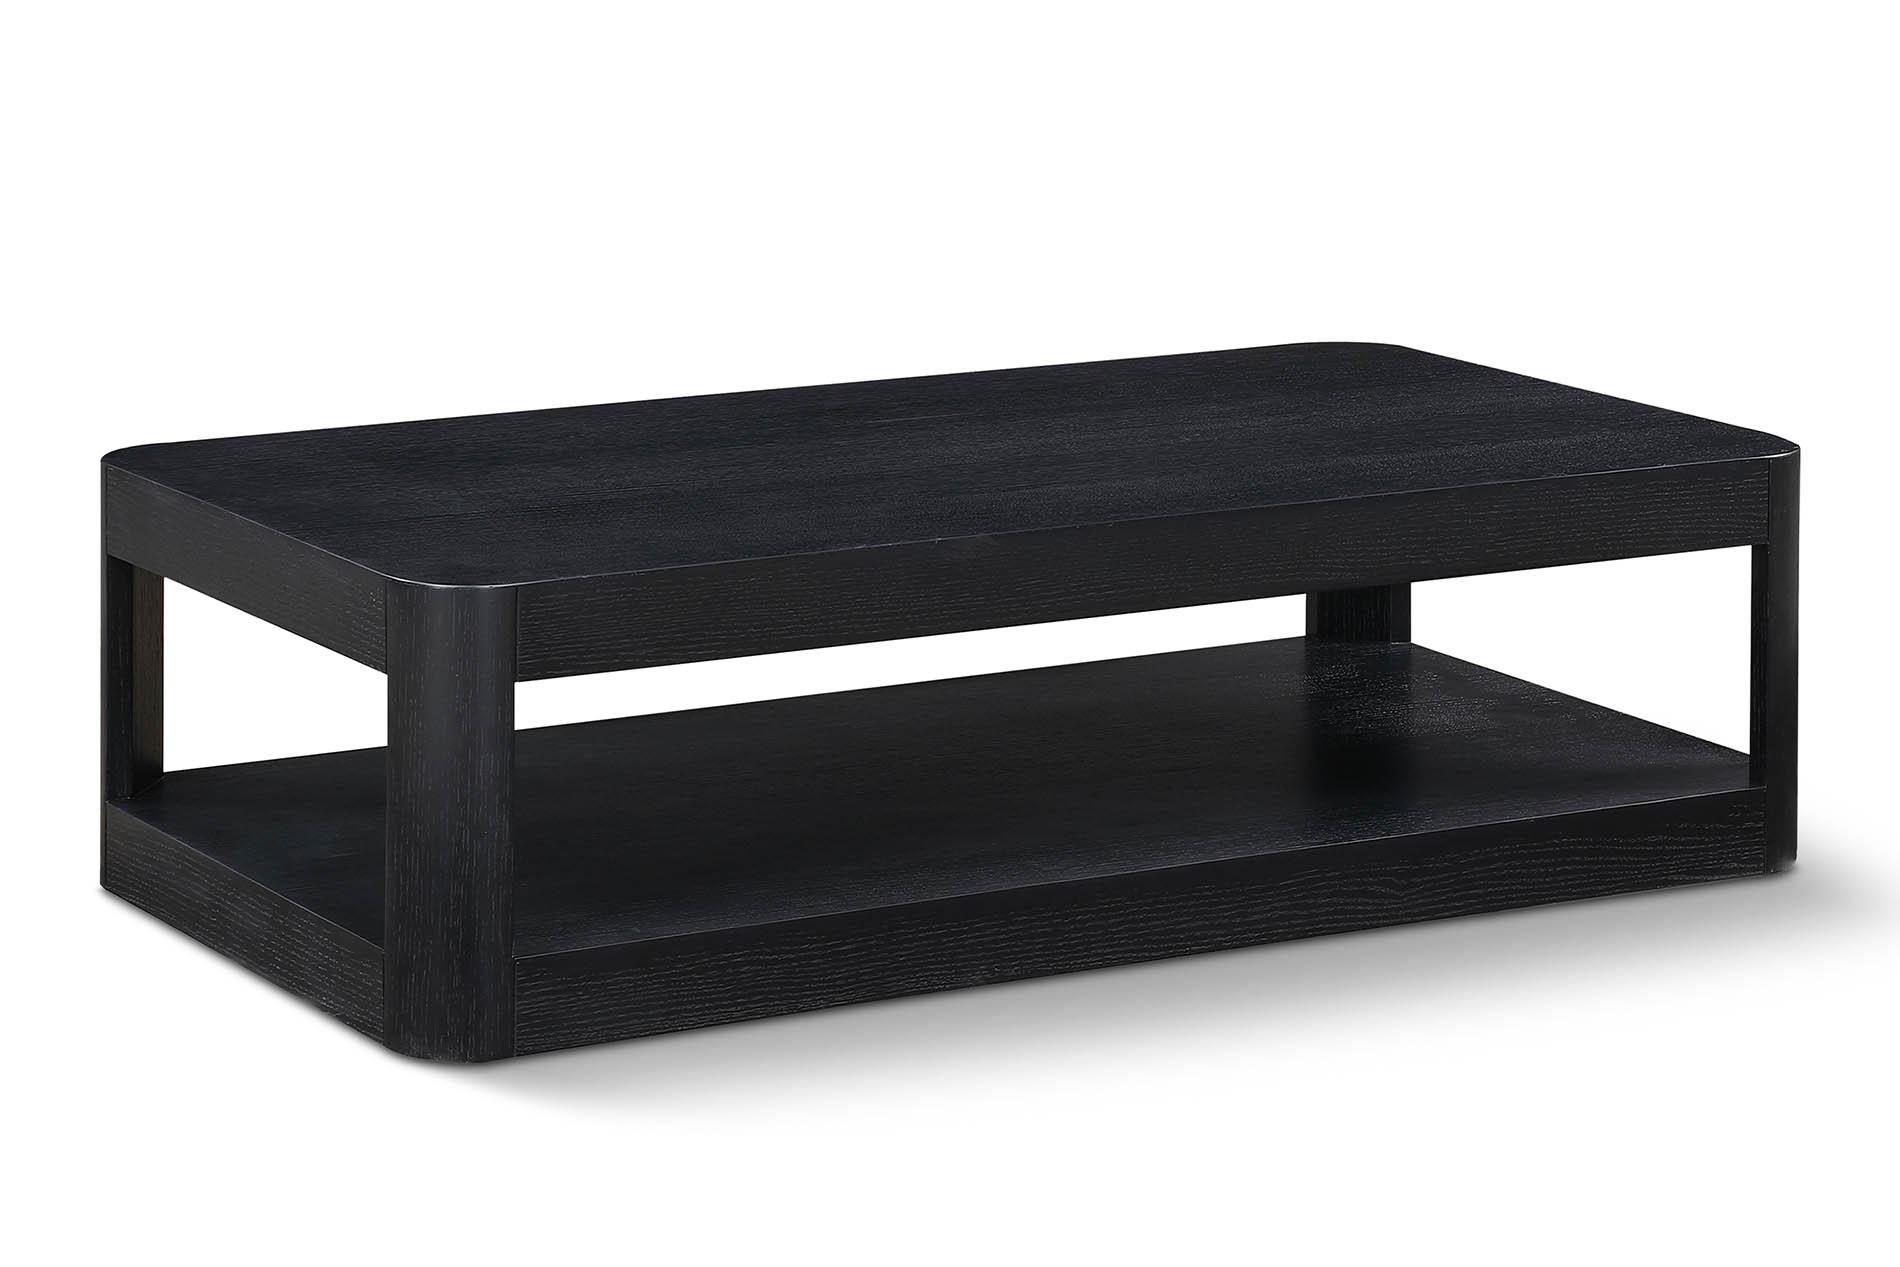 Contemporary, Modern Coffee Table 99068Black-CT 99068Black-CT in Black 